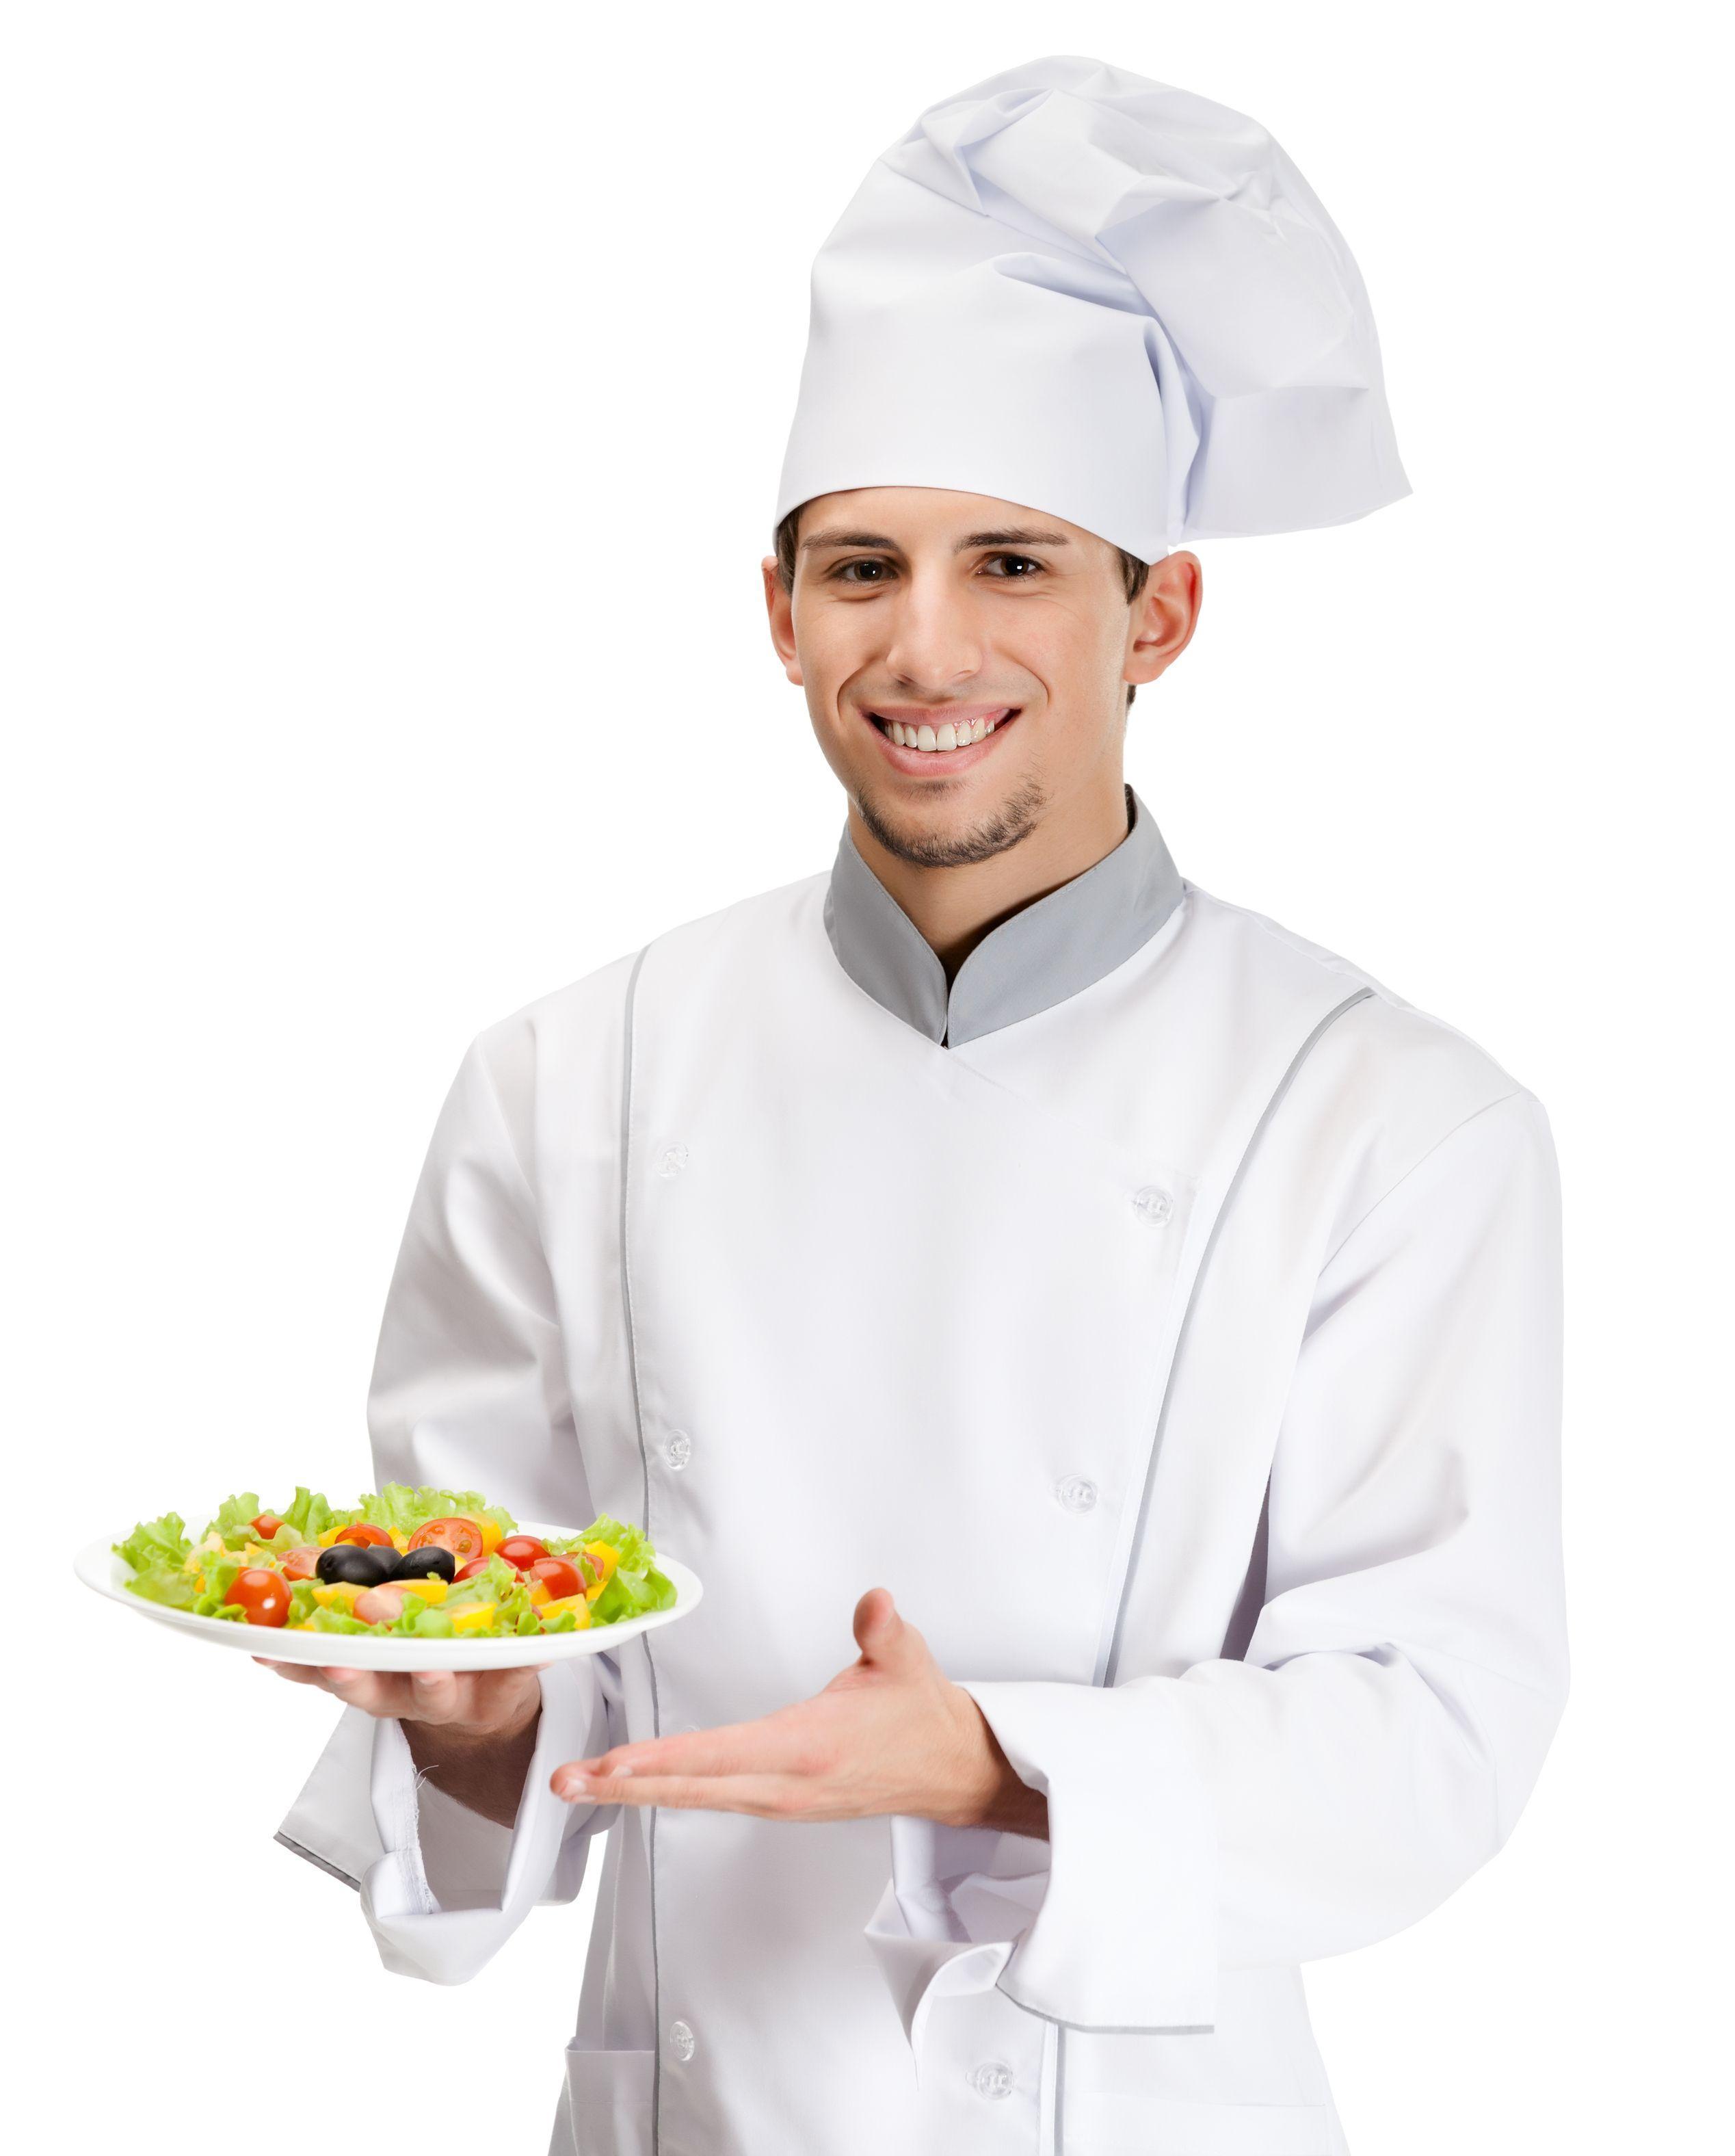 HD Chef Wallpaper and Photo. HD Others Wallpaper